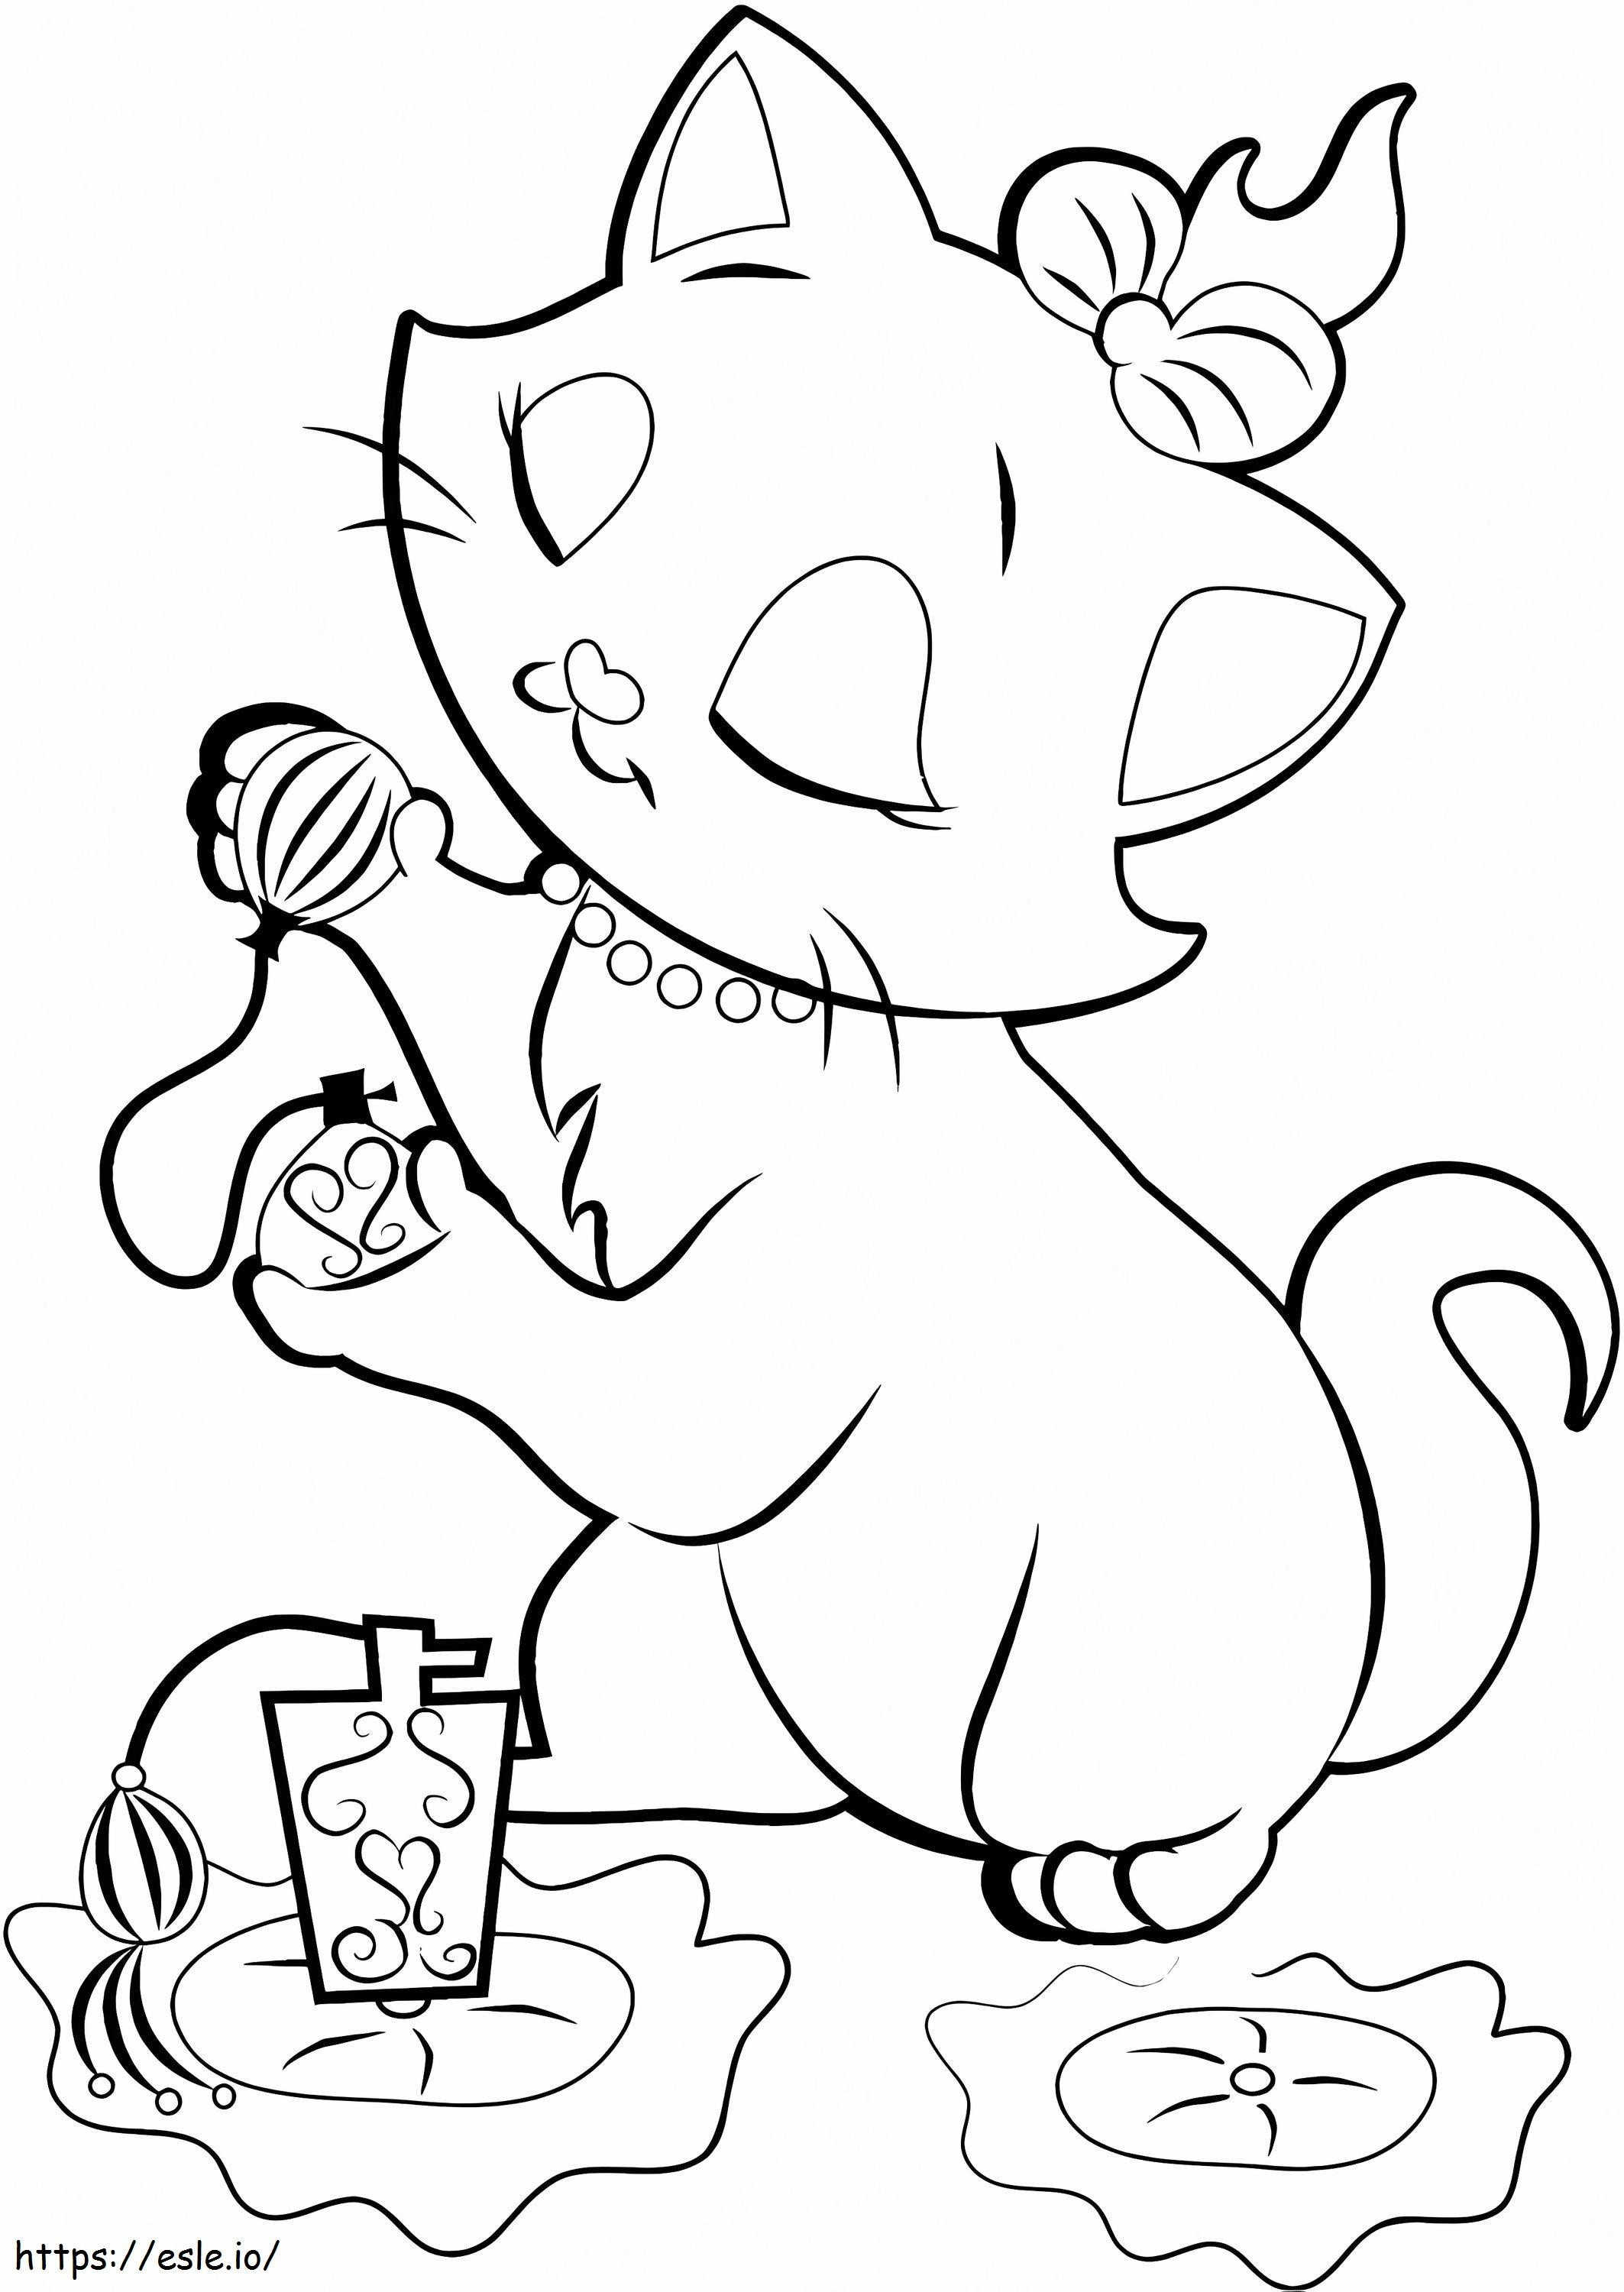 Disney Marie Cat coloring page